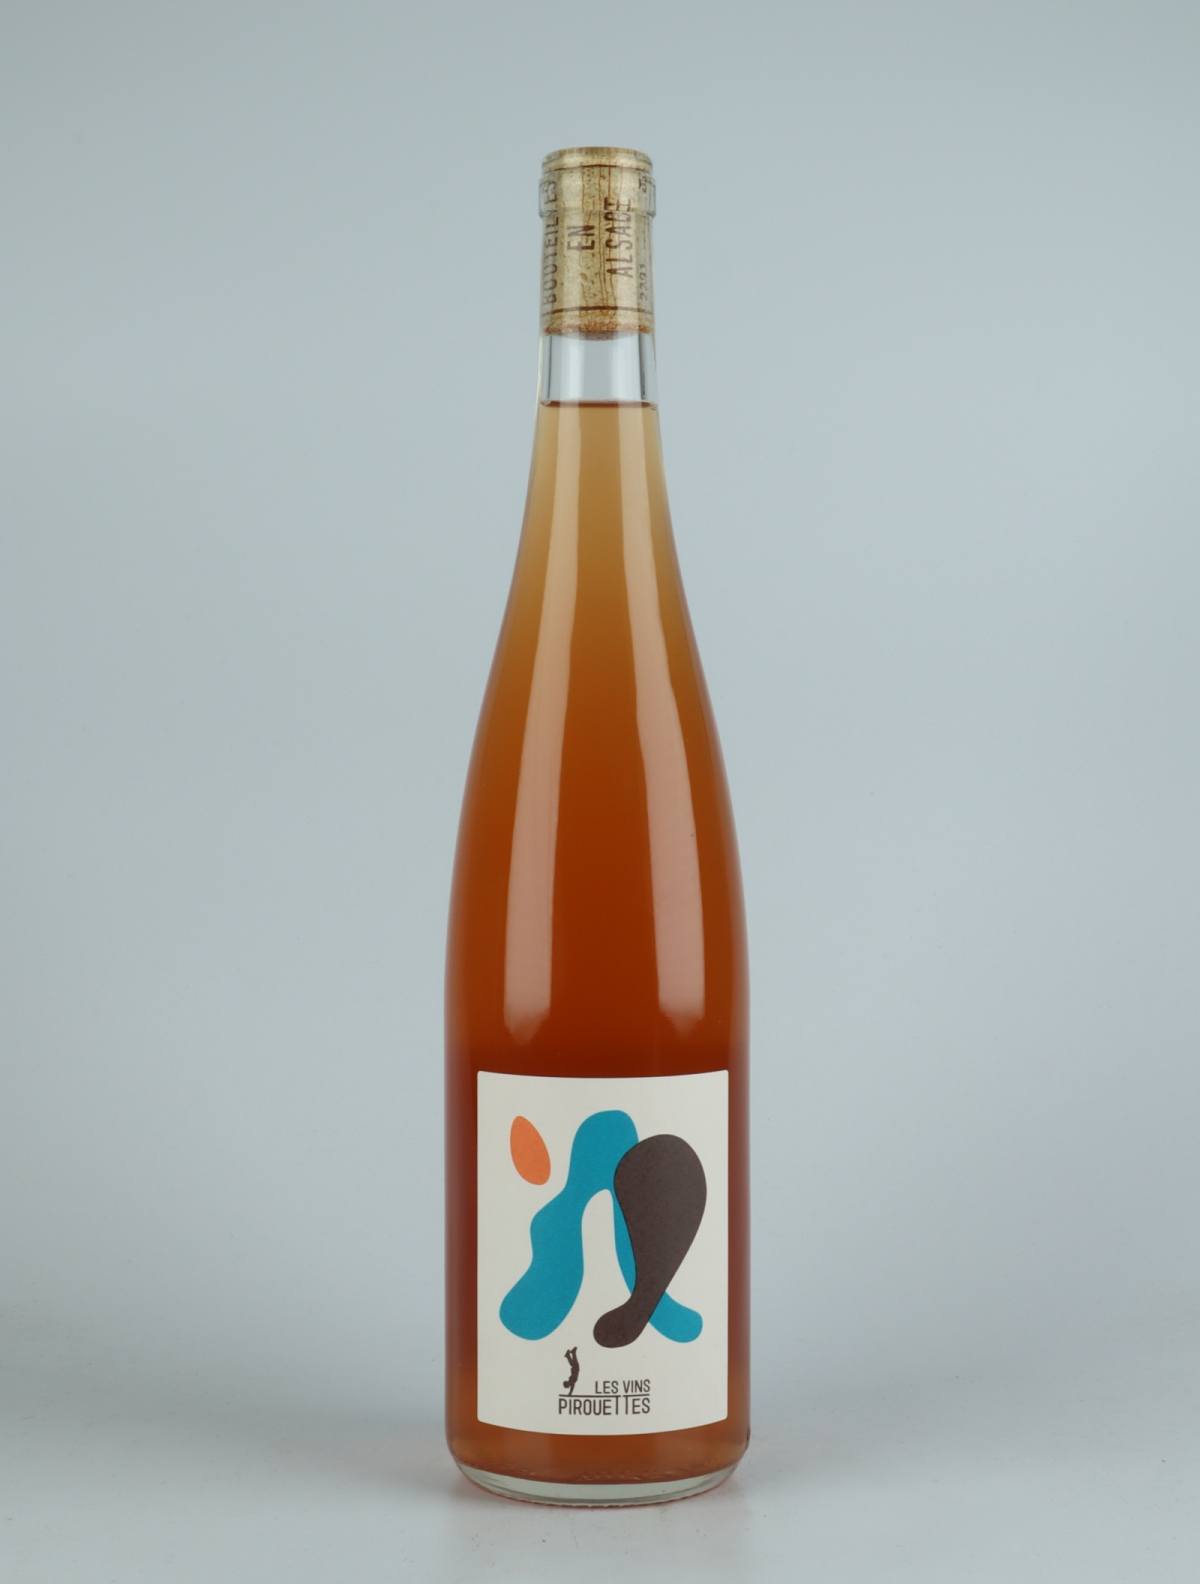 A bottle 2021 Eros Orange wine from Les Vins Pirouettes, Alsace in France